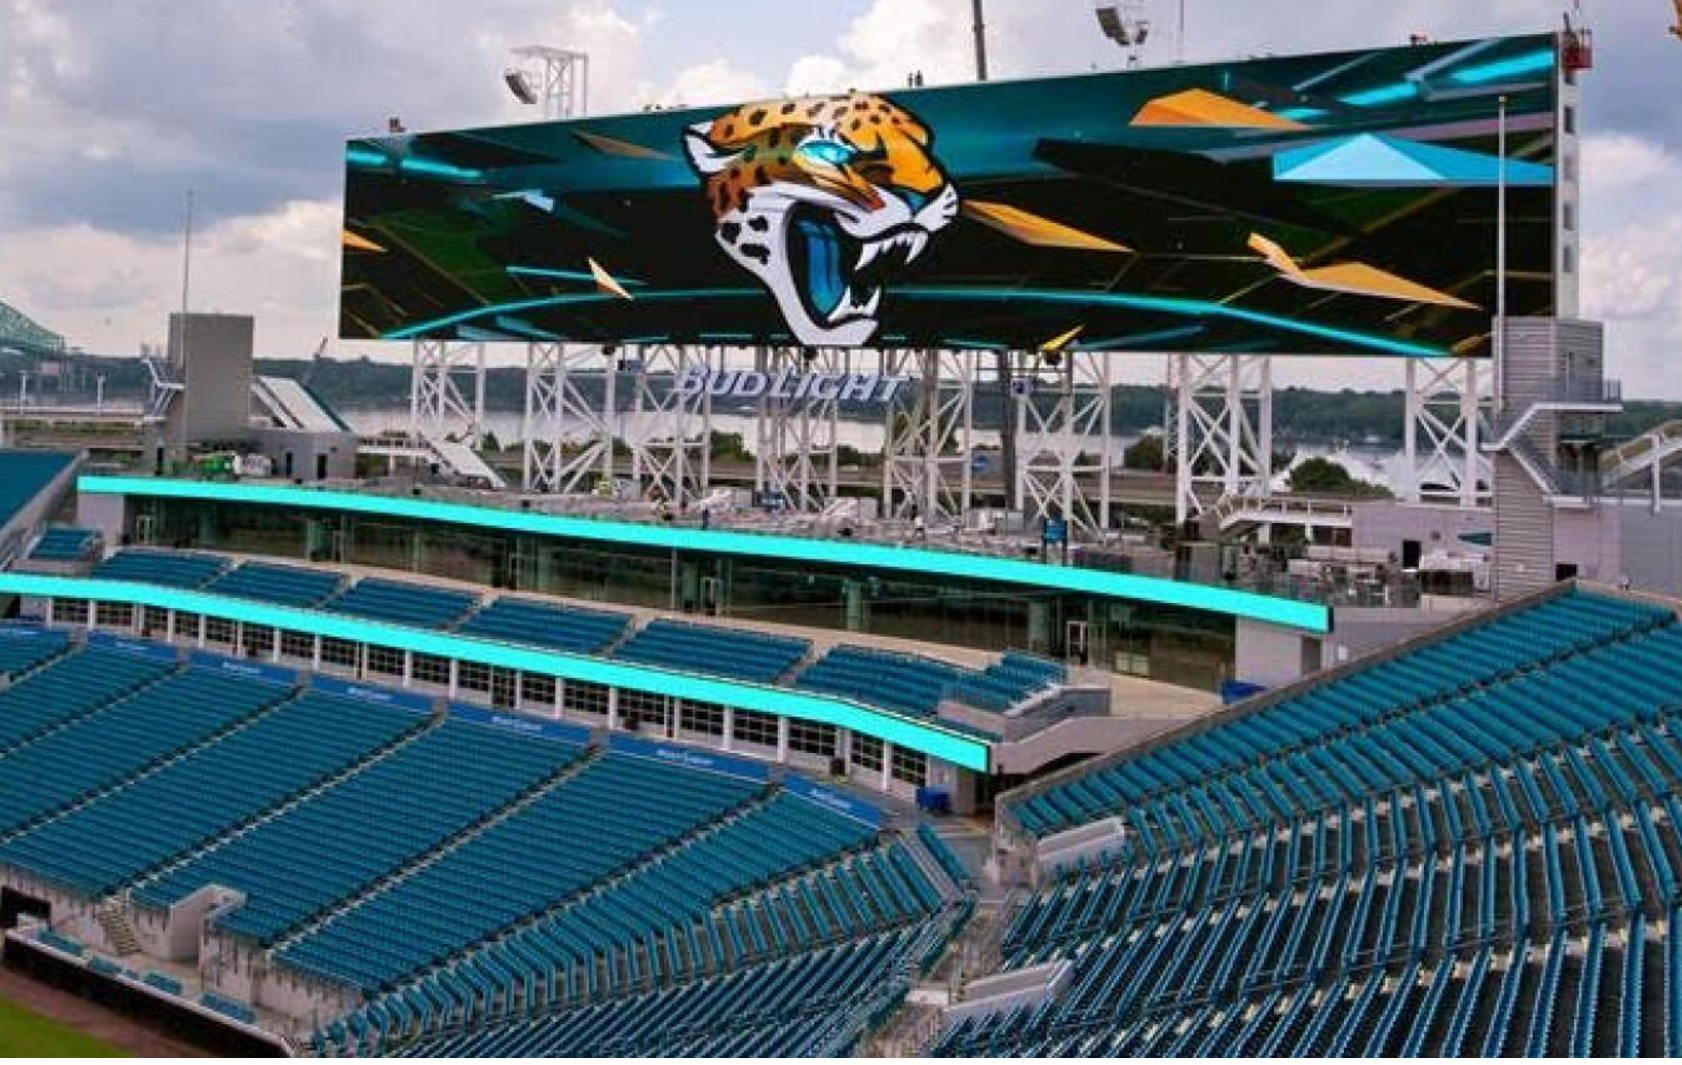 Ever bank Field Live Stream of New Video Boards